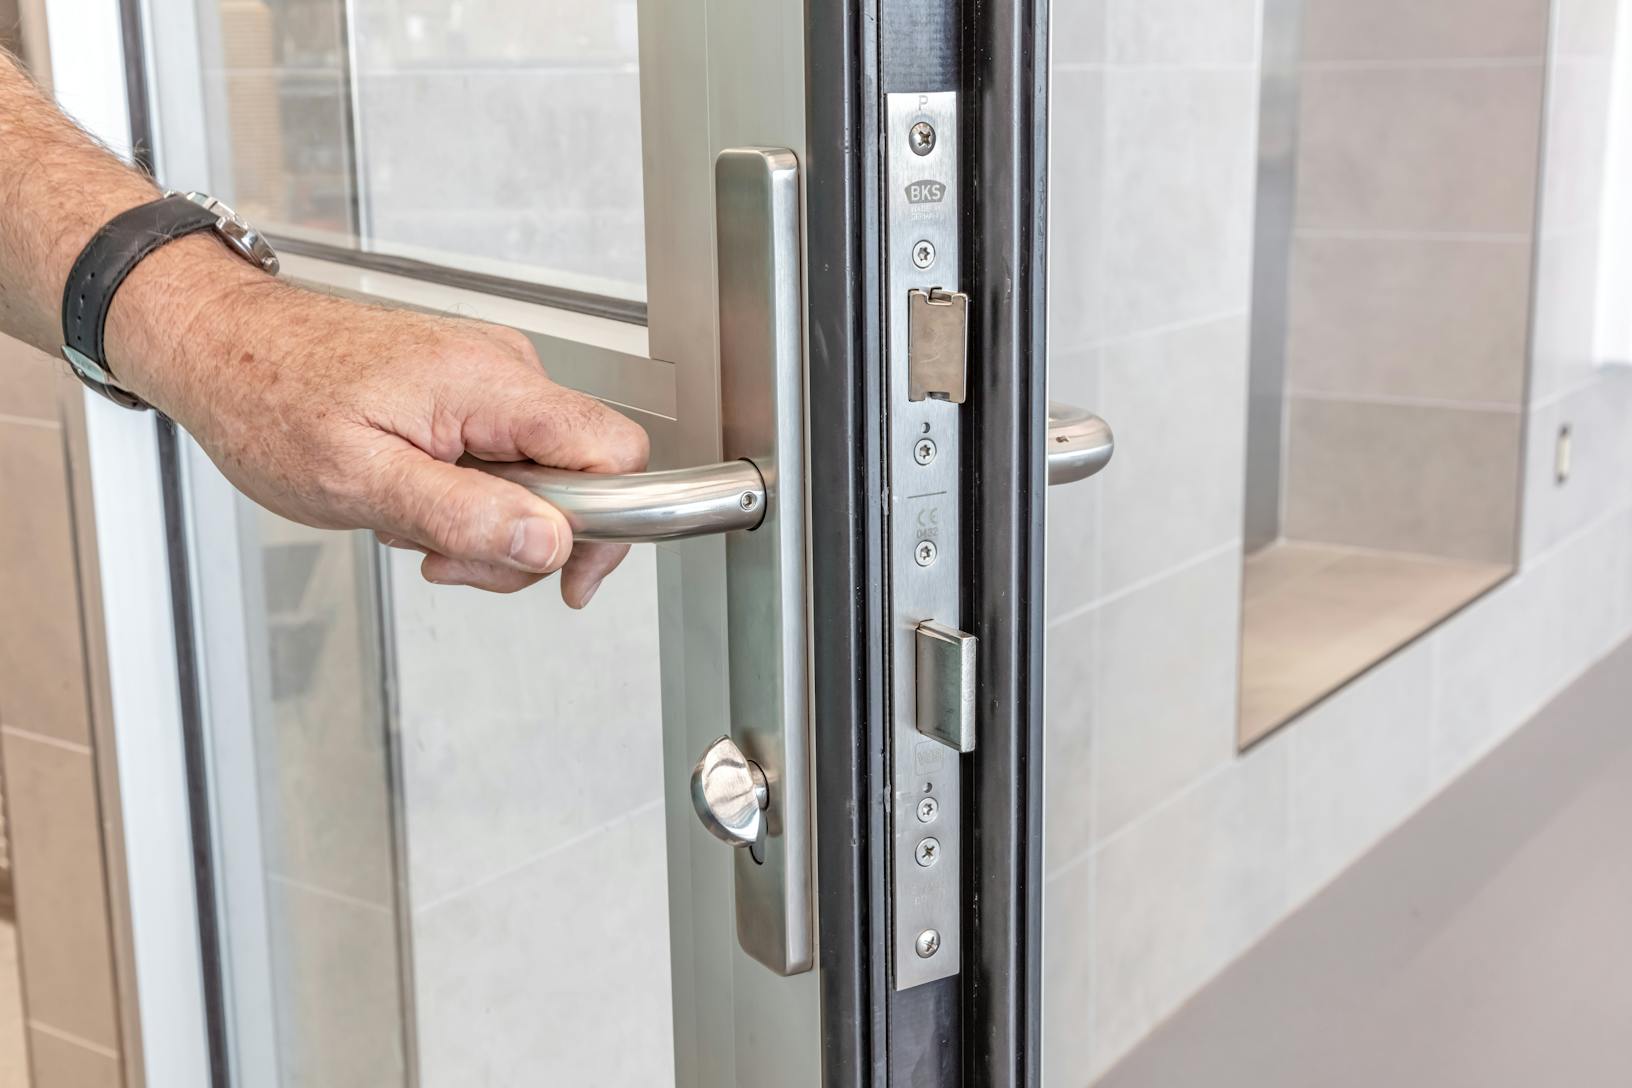 Acoustical movable glass walls - ADA compliant commercial locking options